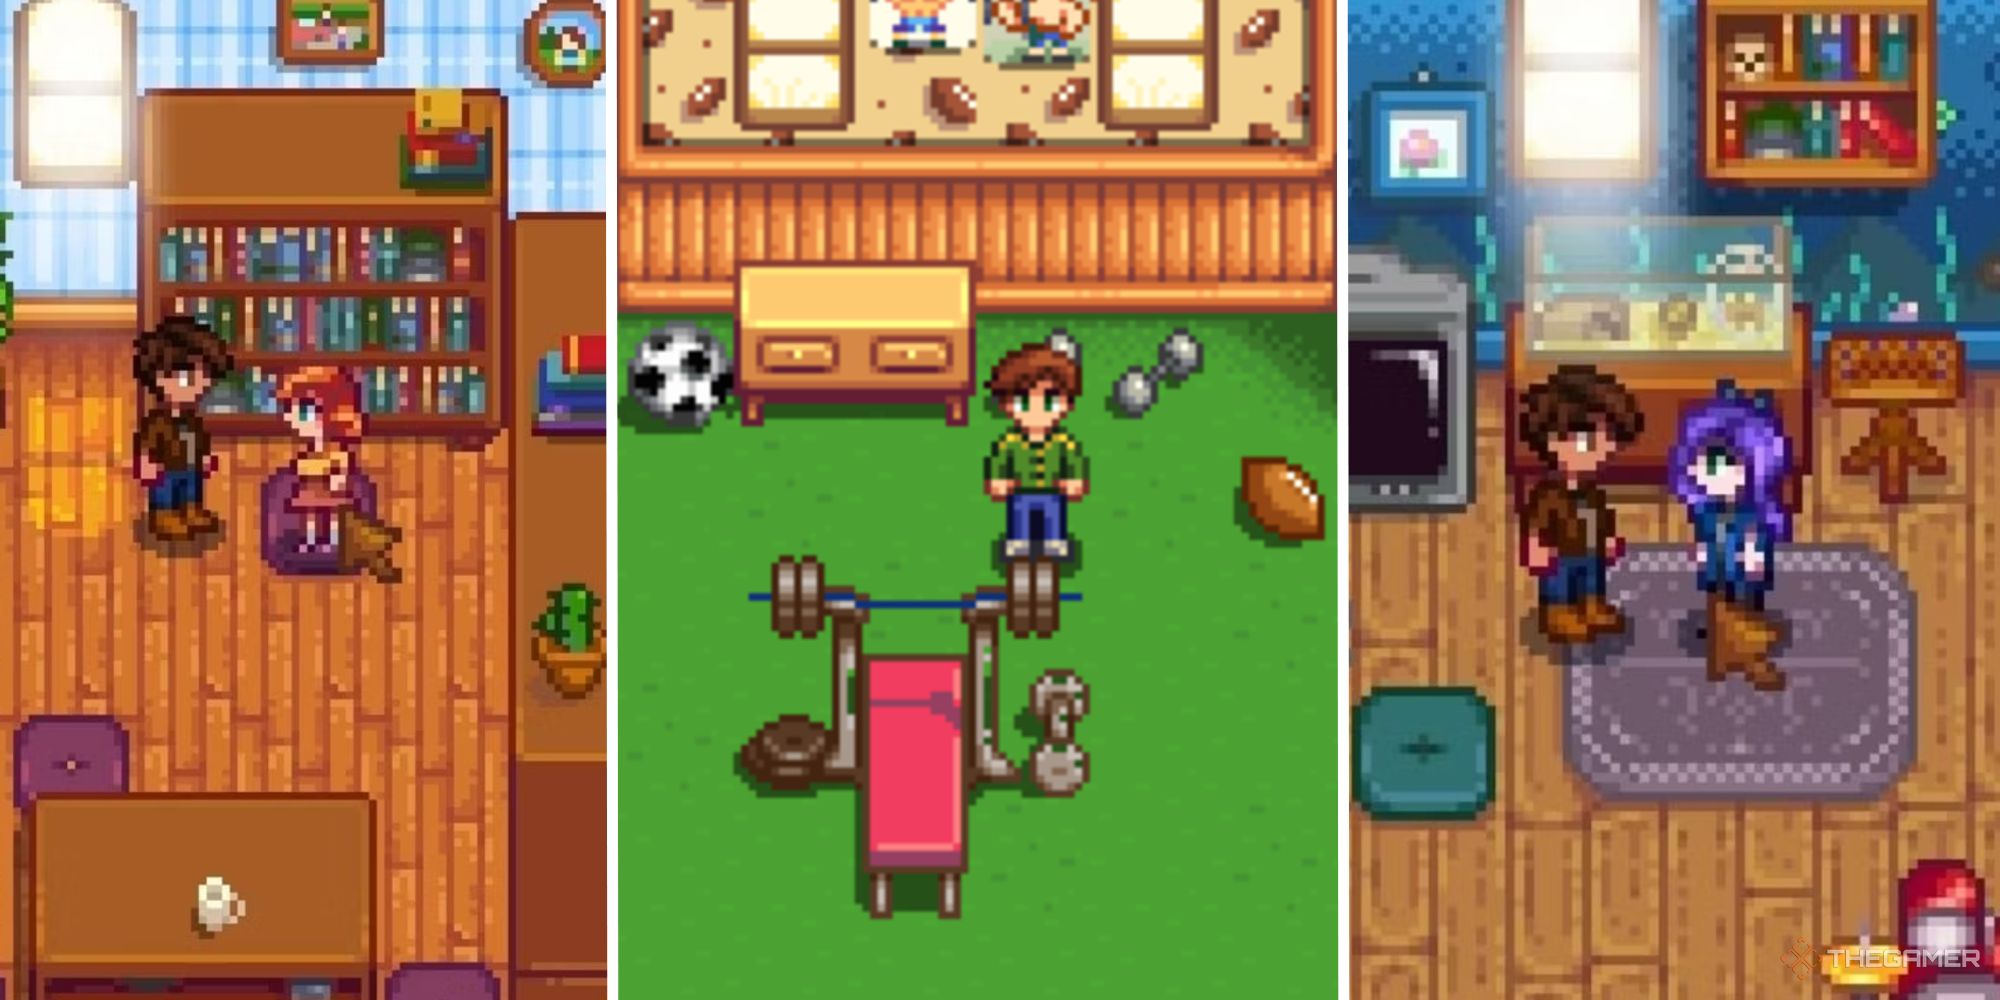 stardew valley rooms of abigail, penny, and alex in farmhouse